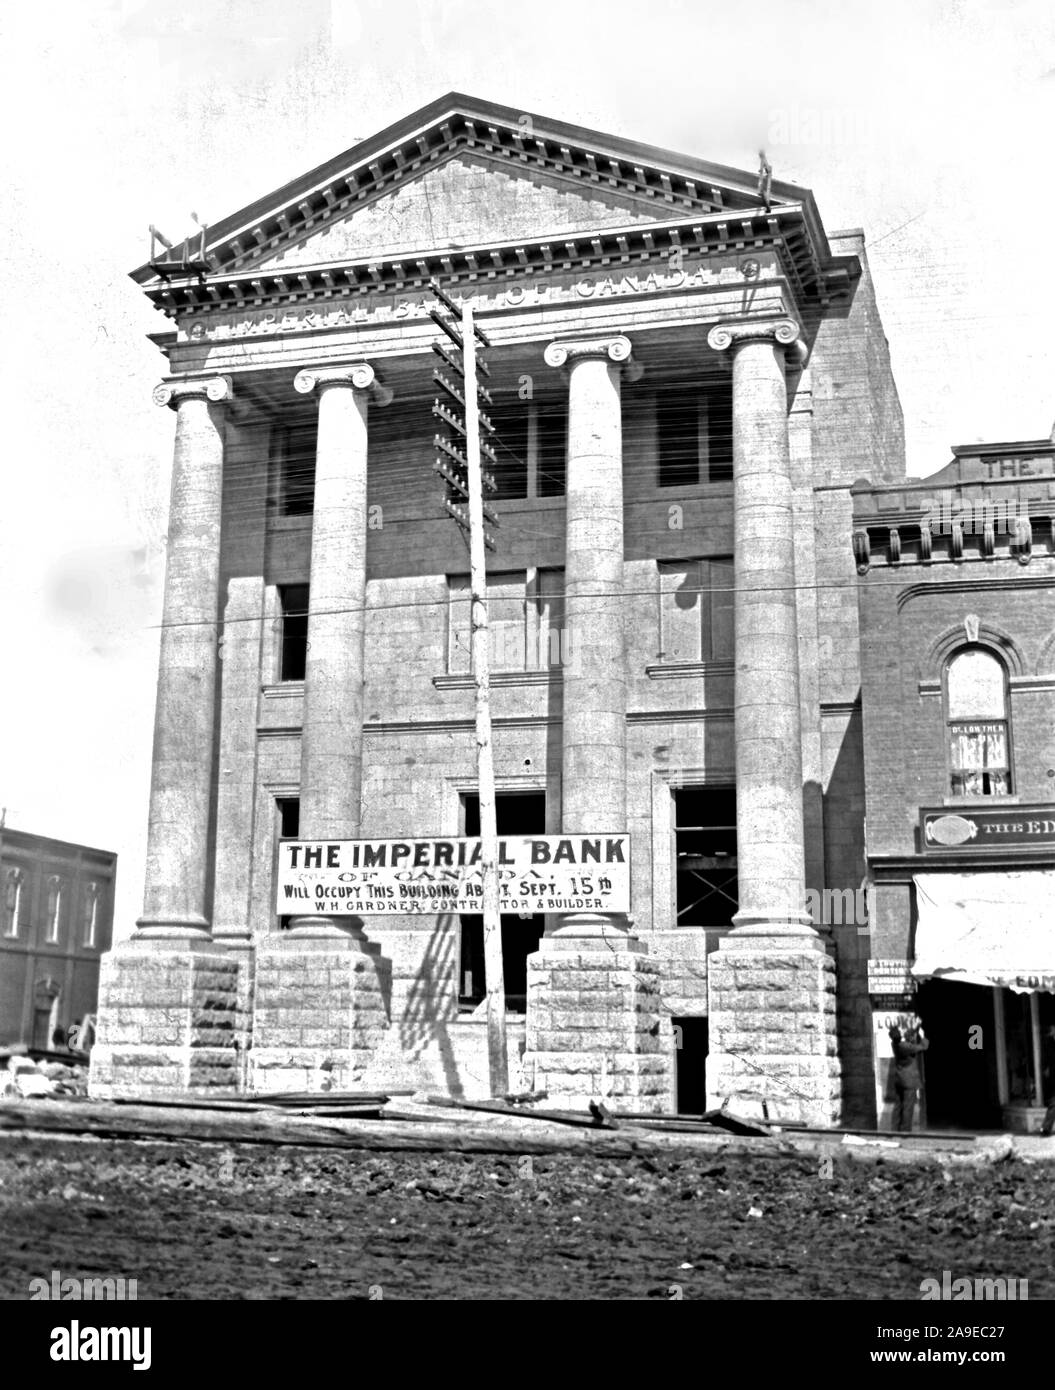 A banner across the front of the building declares that 'The Imperial Bank of Canada will occupy this building about Sept 15th, W. H. Gardner, Contractor and Builder.'. Stock Photo